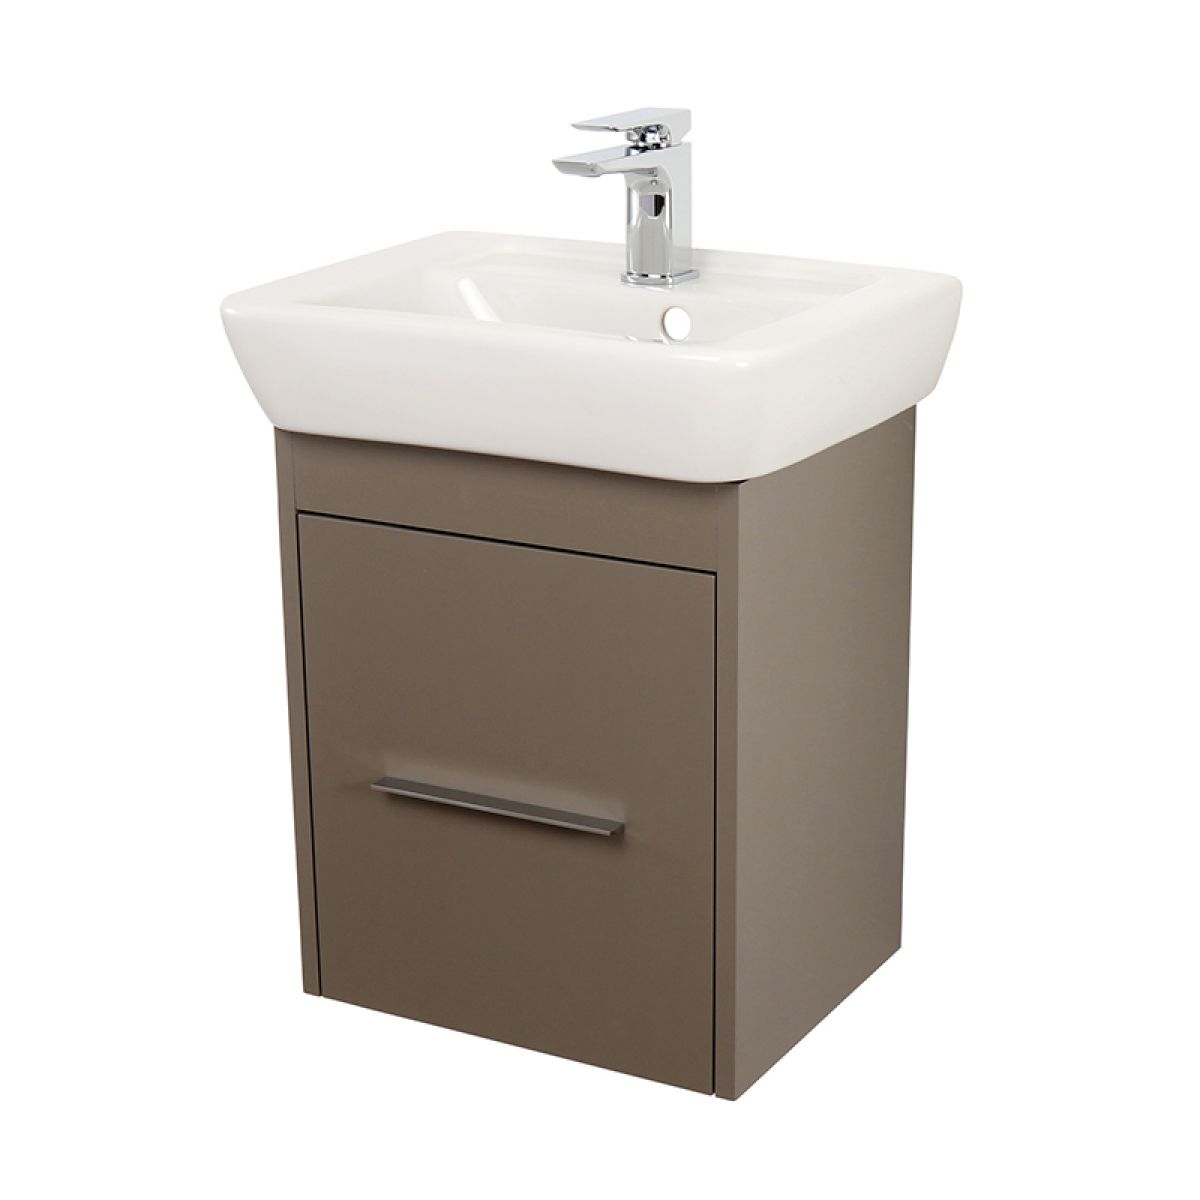 Abacus Simple Wall Hung Cloakroom, Wall Hung Vanity Unit For Cloakroom